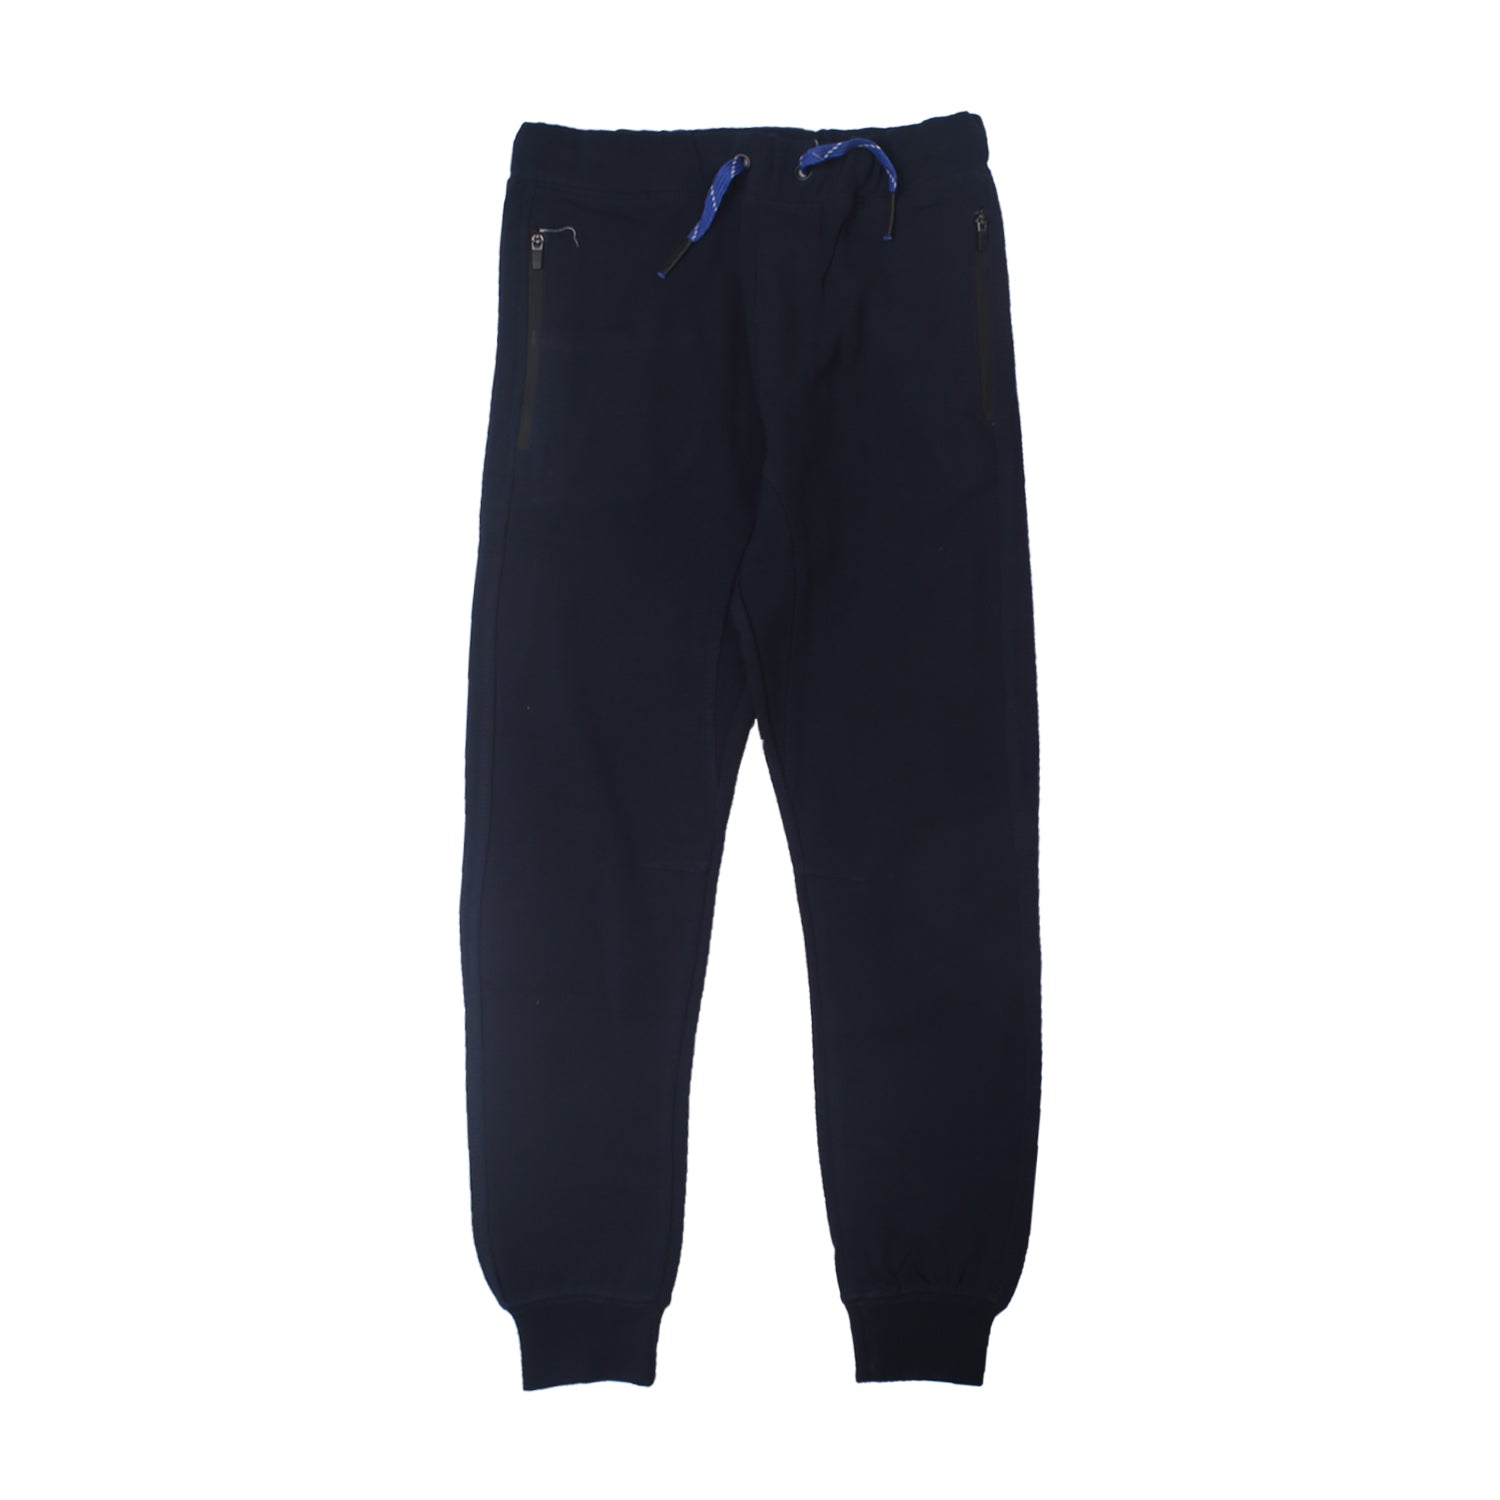 NEW NAVY BLUE DOUBLE ZIP POCKET TROUSER PANTS FOR BOYS